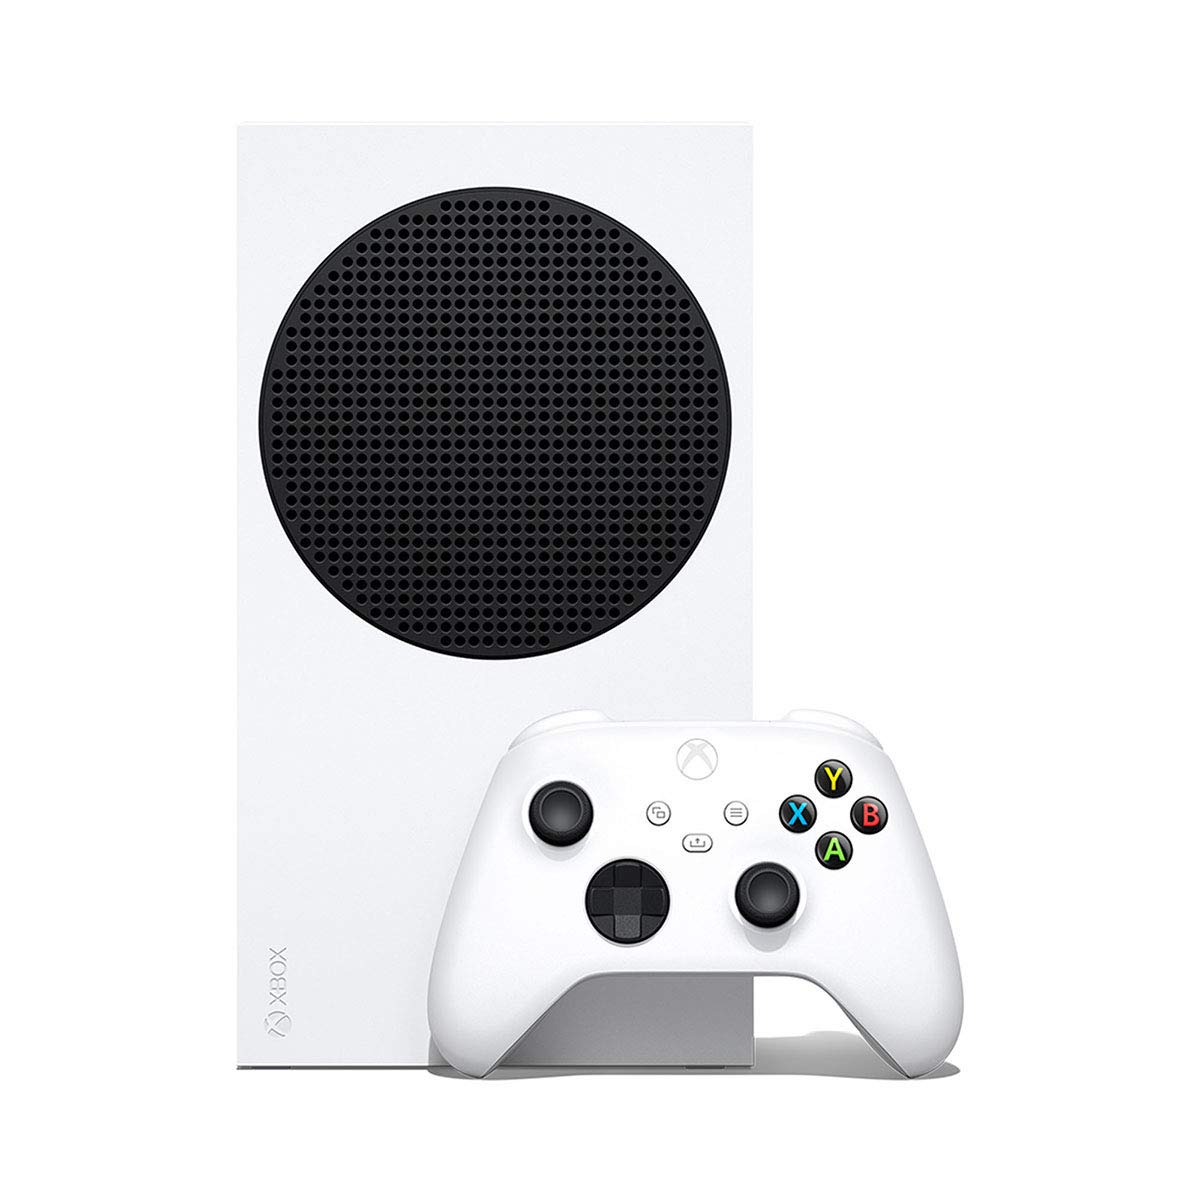 2020 New Xbox 512GB SSD Console -Robot White - image 2 of 7